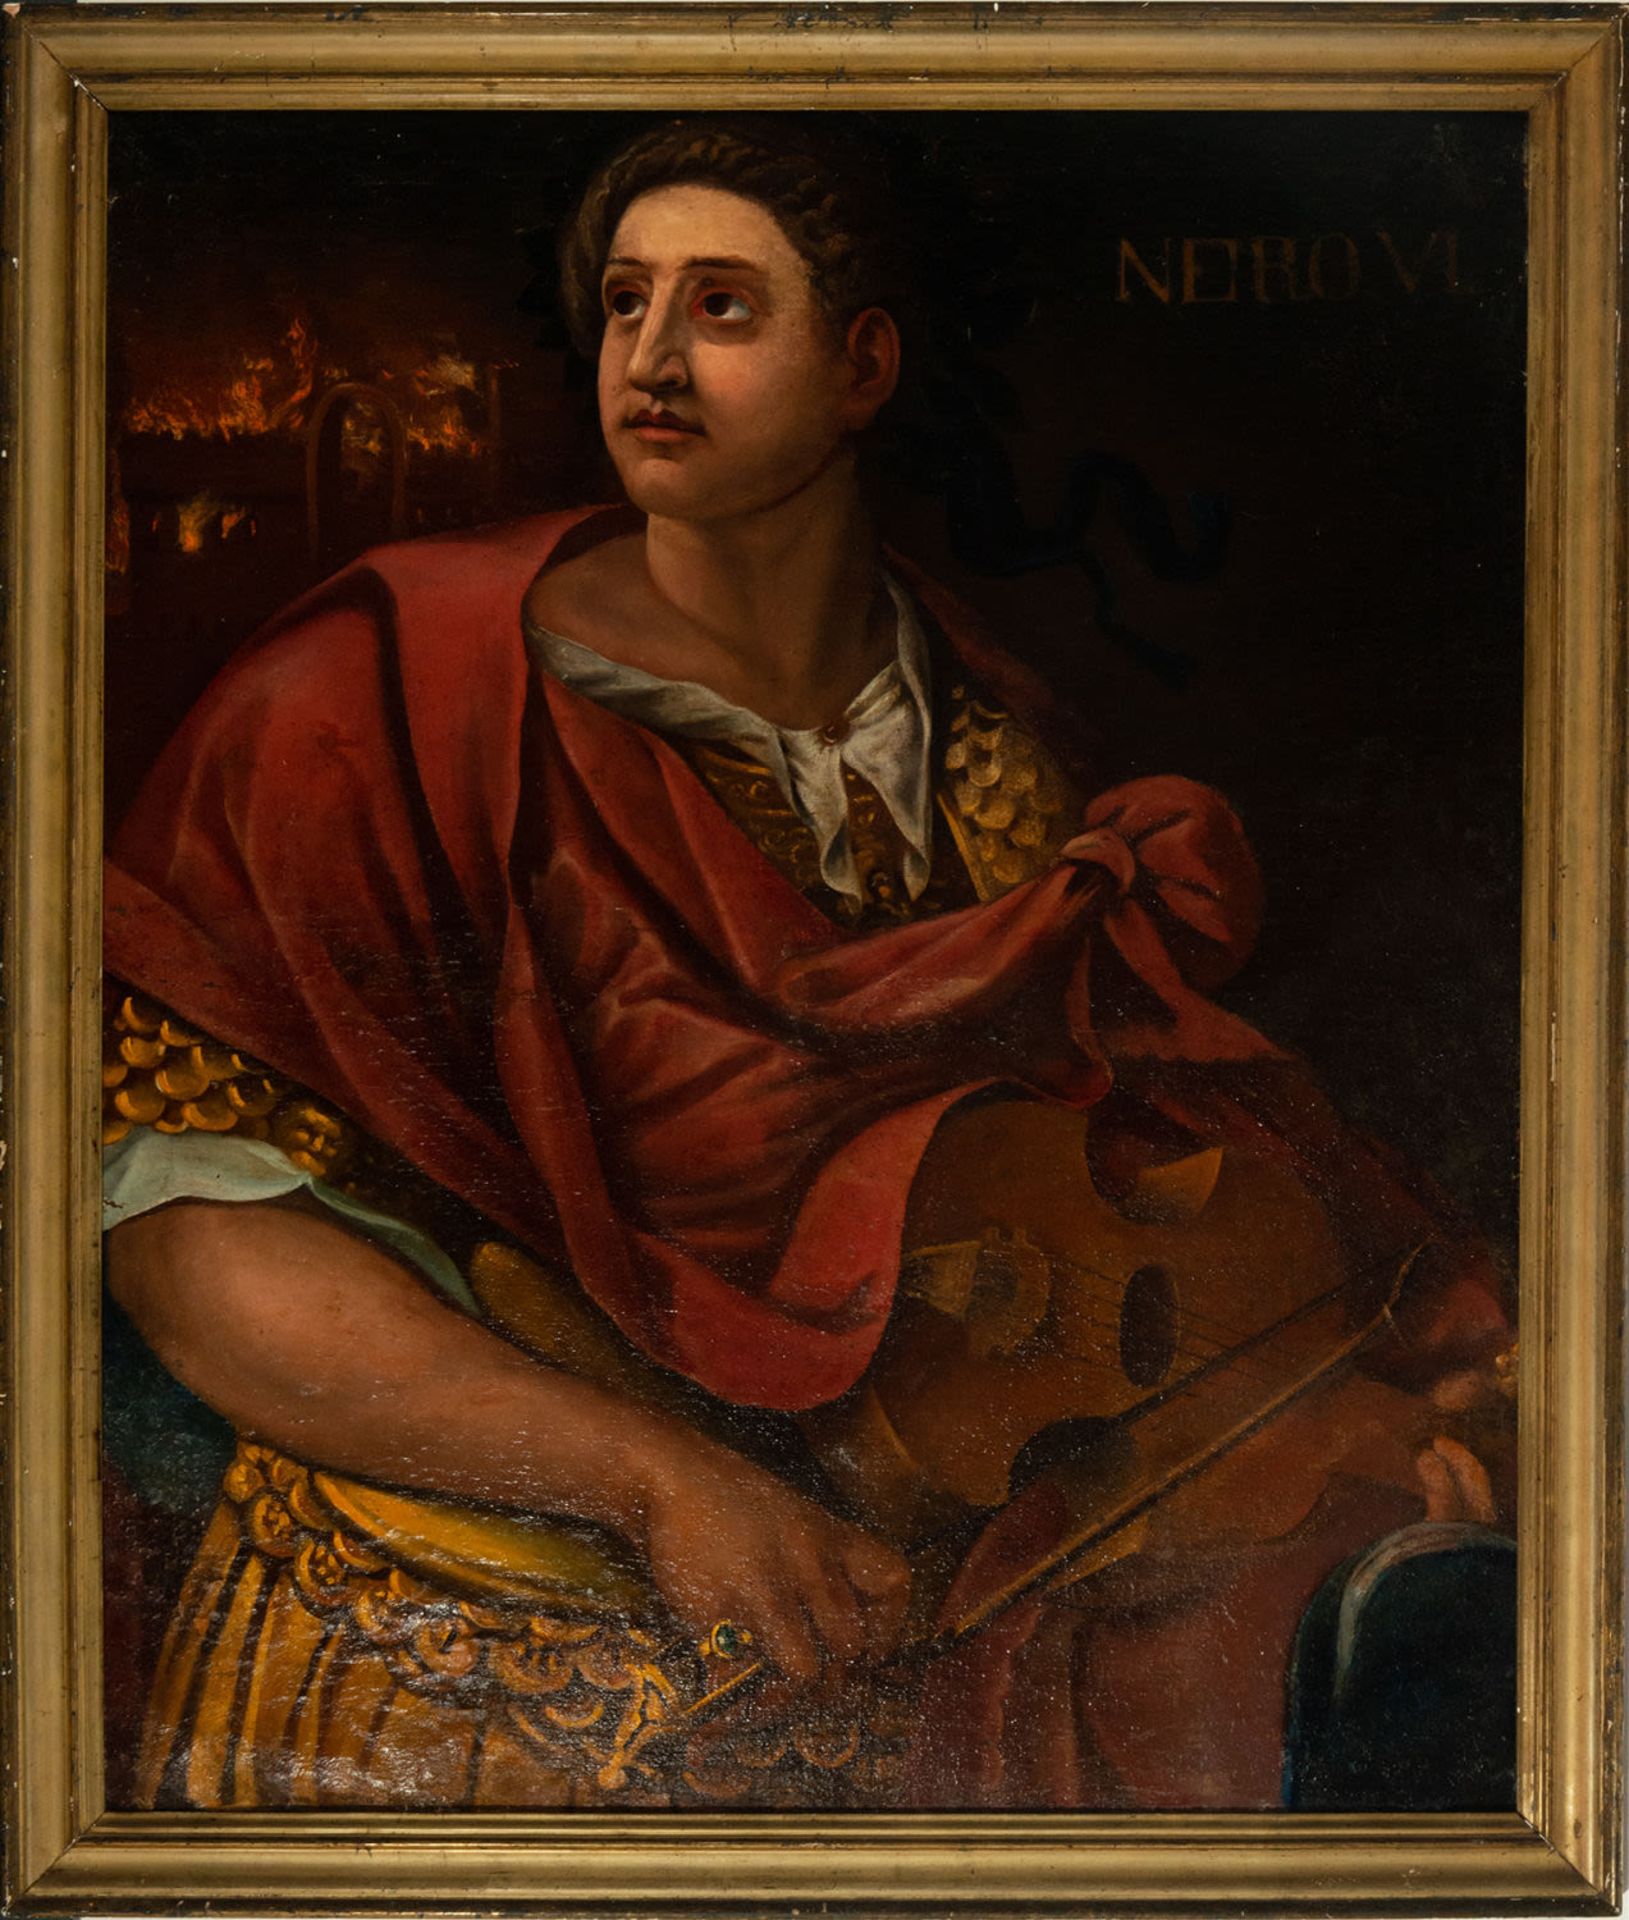 Important Nero Playing the Lyre before the Fire of Rome, 16th century Italian school, school of Vinc